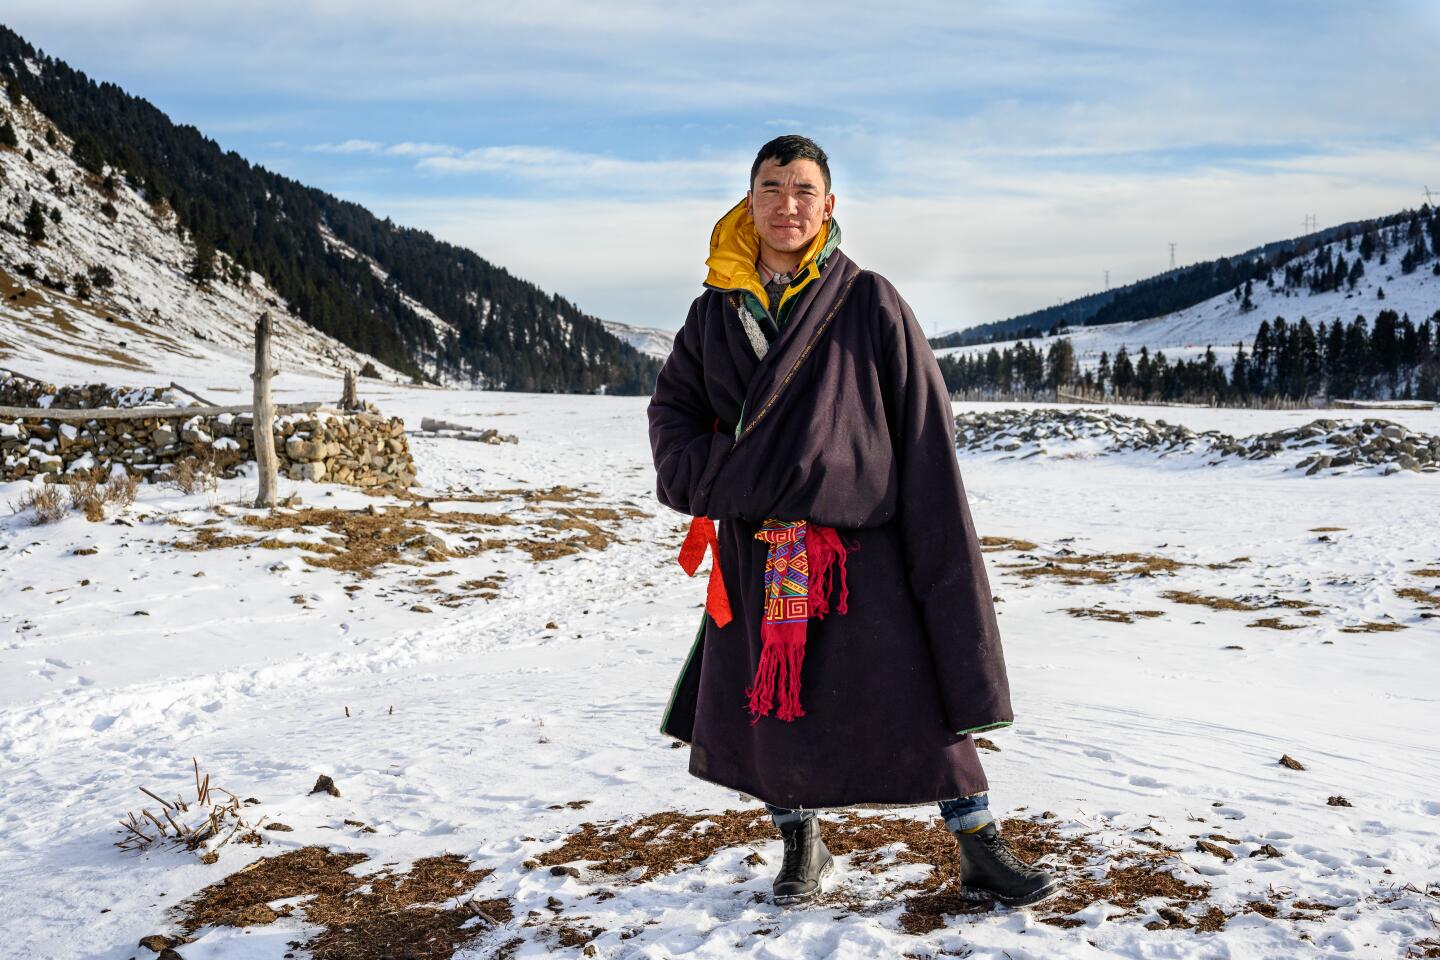 Lobsang, 32, a nomad in the Garze region, poses for a portrait on Jan. 26, 2020.